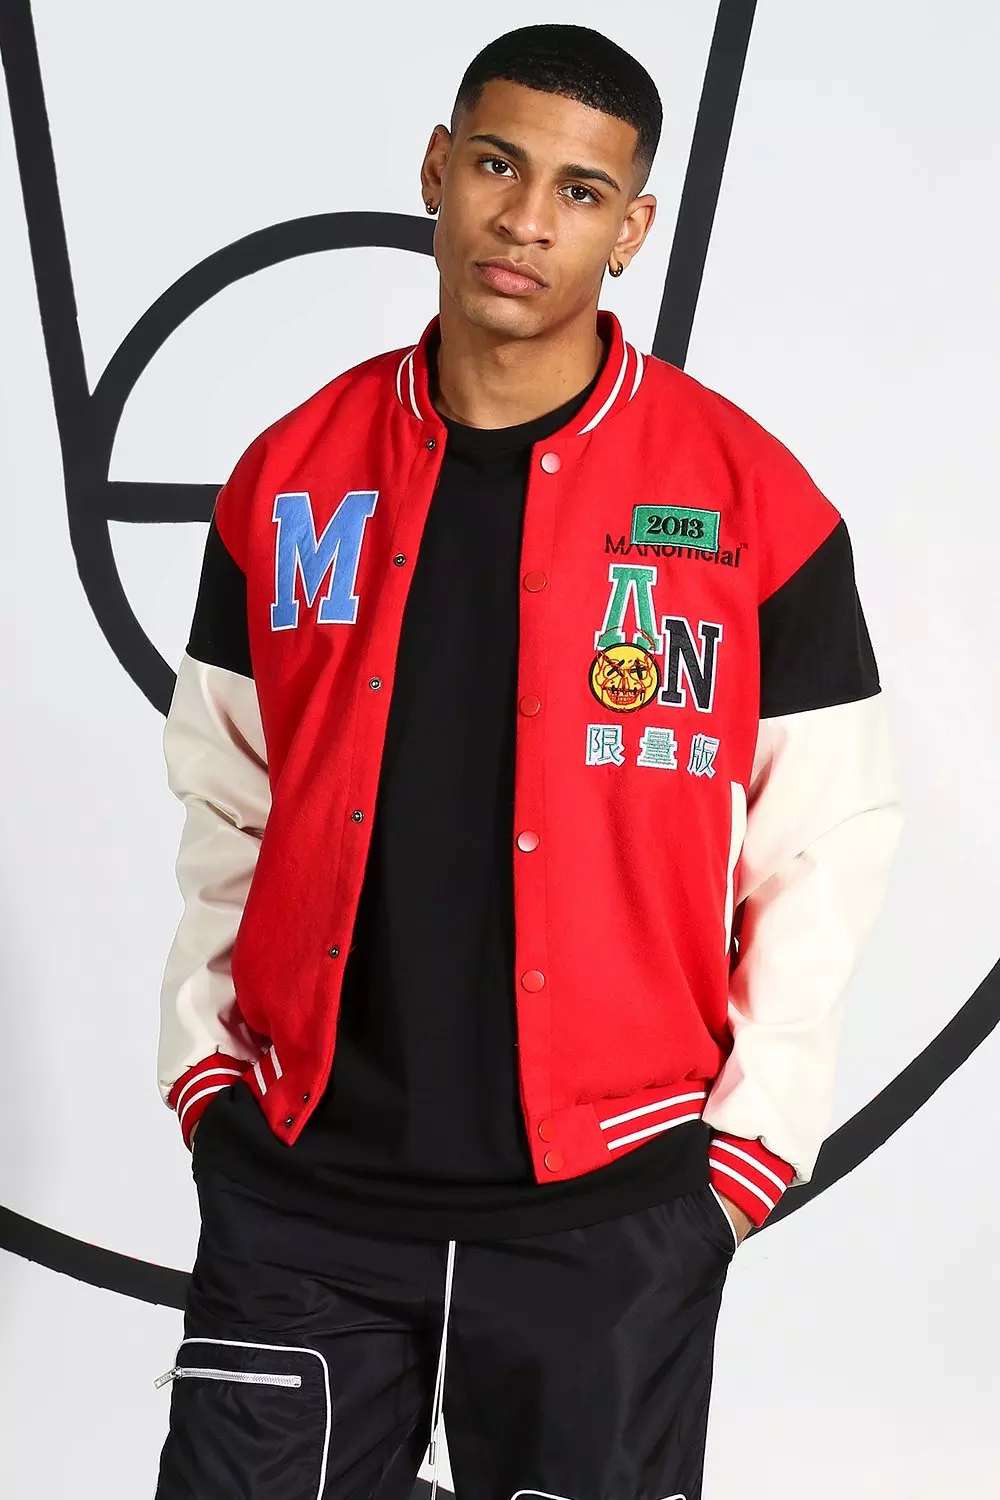 BoohooMAN Plus Red and White Cotton Jersey Bomber Varsity Jacket with  Badges